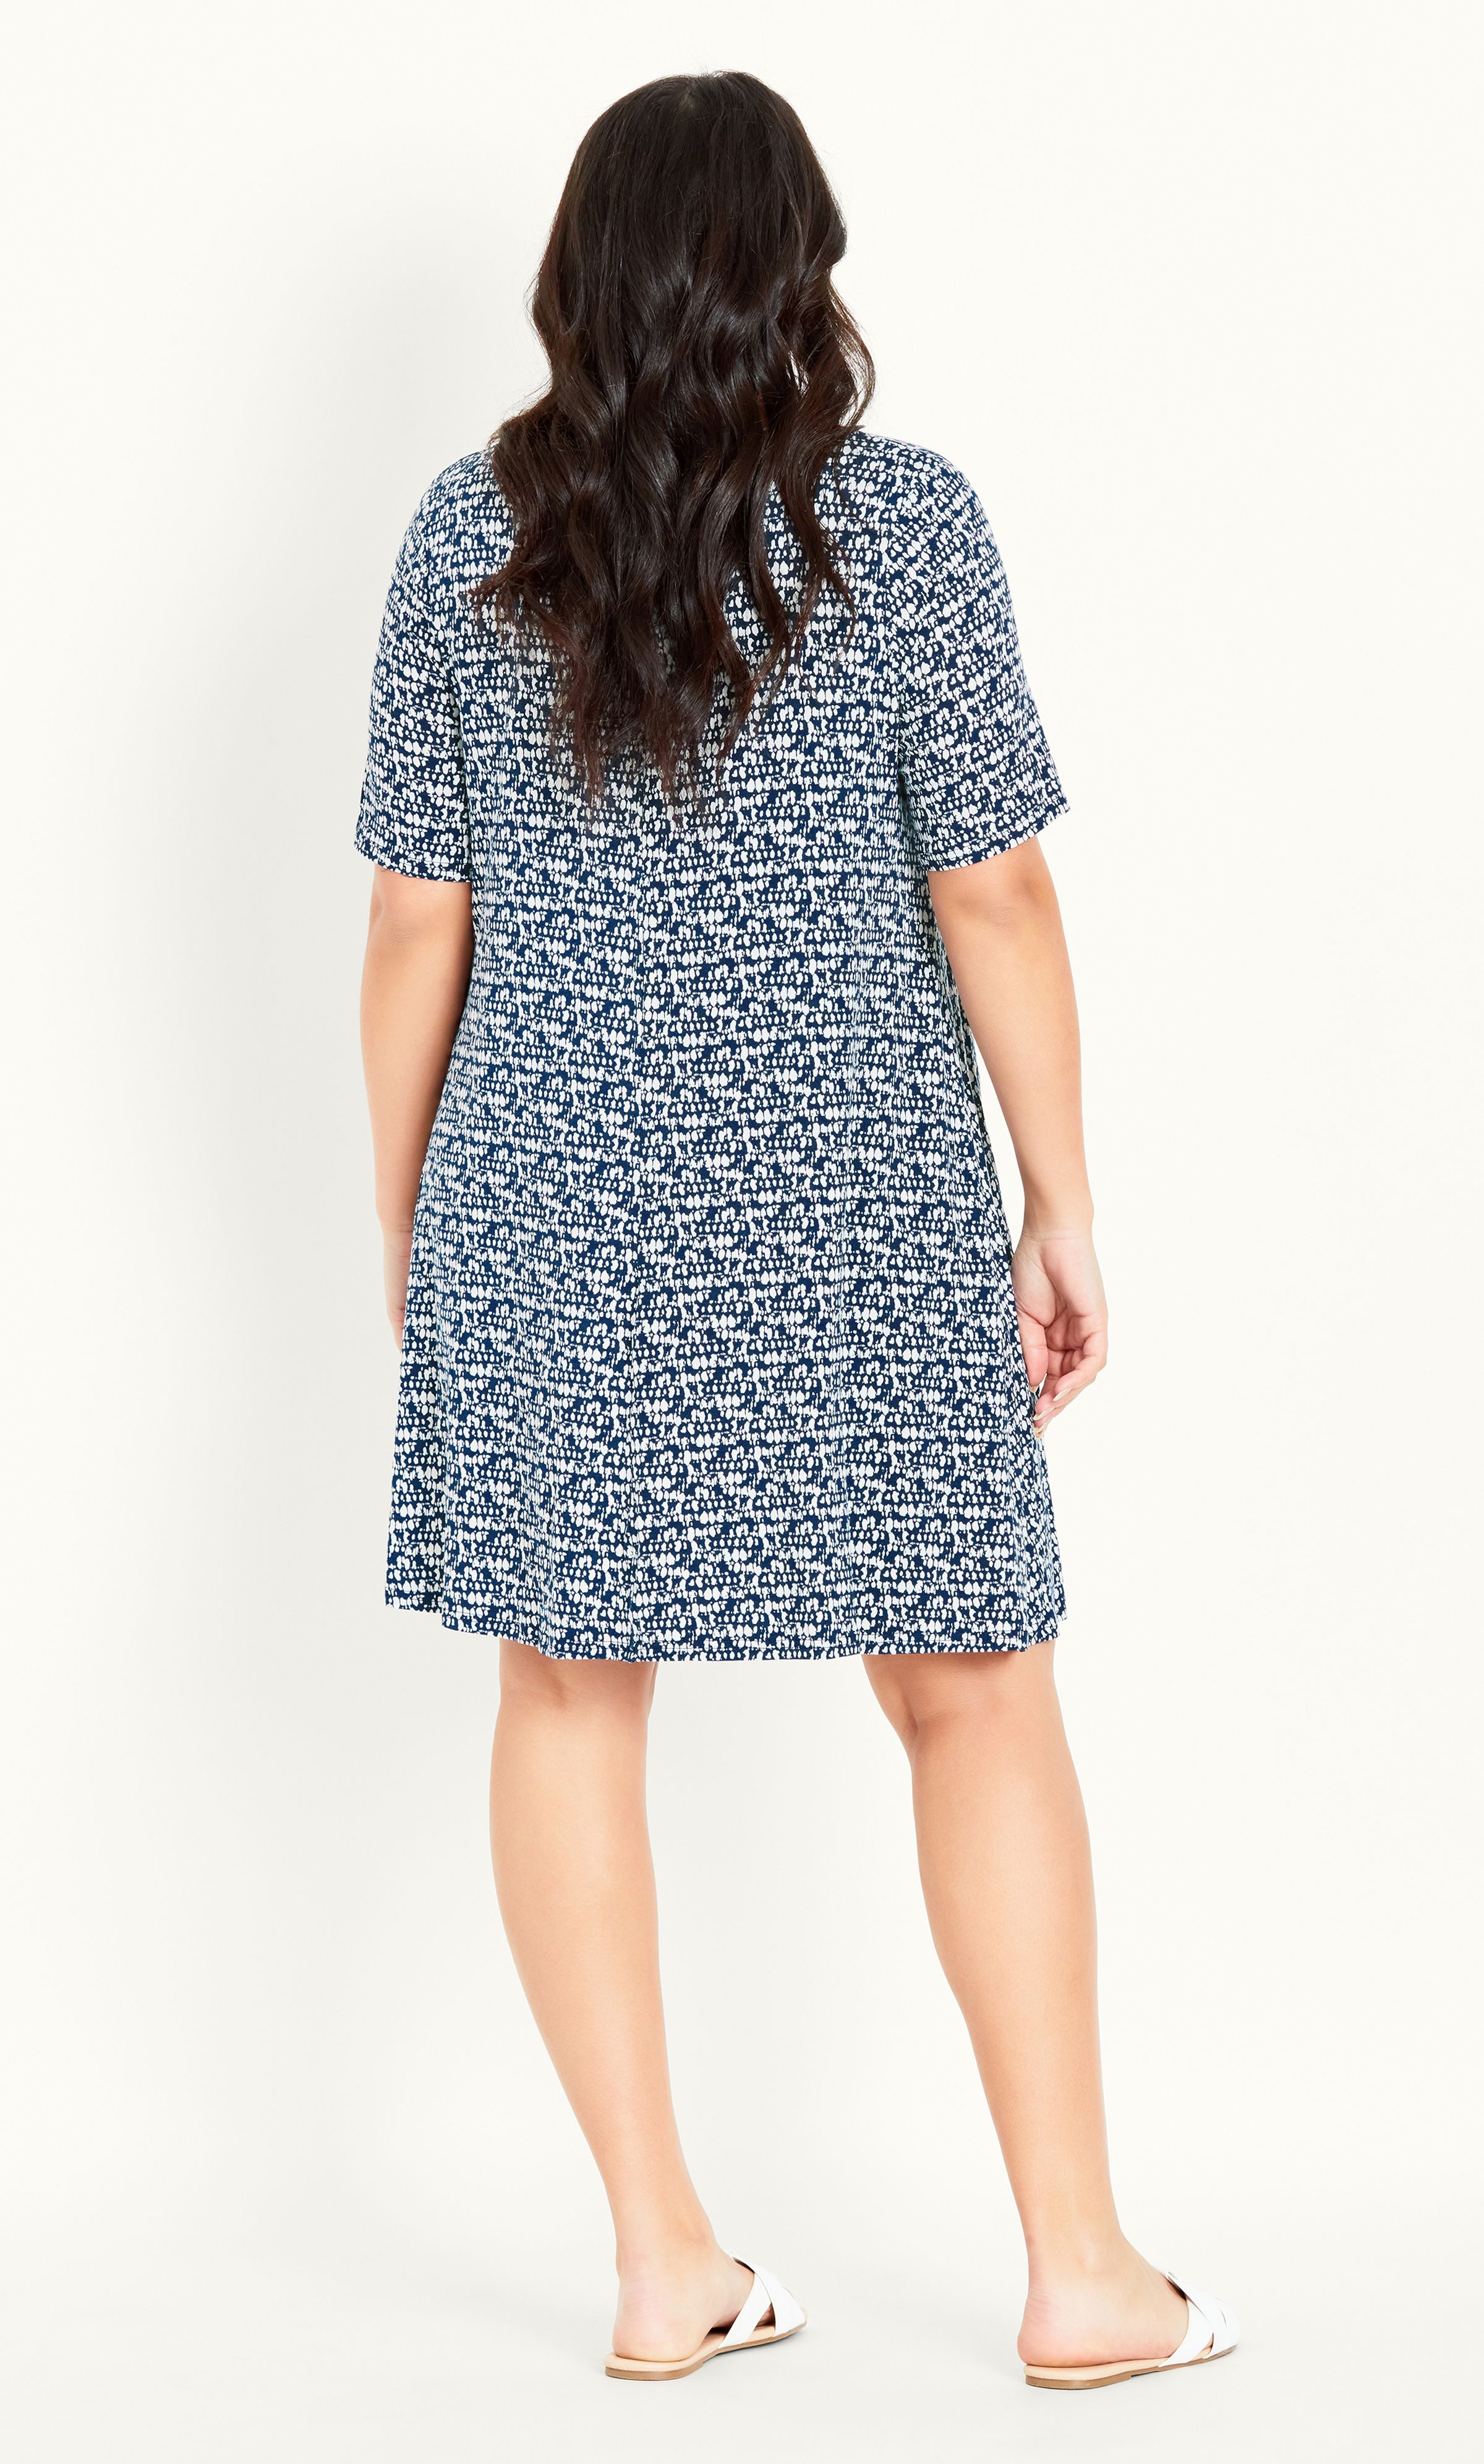 Swish and sway all day long in the super breezy stylings of our Swing Dash Print Dress! Featuring a comfortable relaxed fit and soft stretch fabrication, this dress is bound to get some major airtime in your summer rotation. Key Features Include: - Round neckline - Short sleeves - Relaxed fit - Unlined - Pull over style - Soft stretch fabrication - Above knee length For a chic touch, team with a waist belt, wedges and super cute baguette bag.